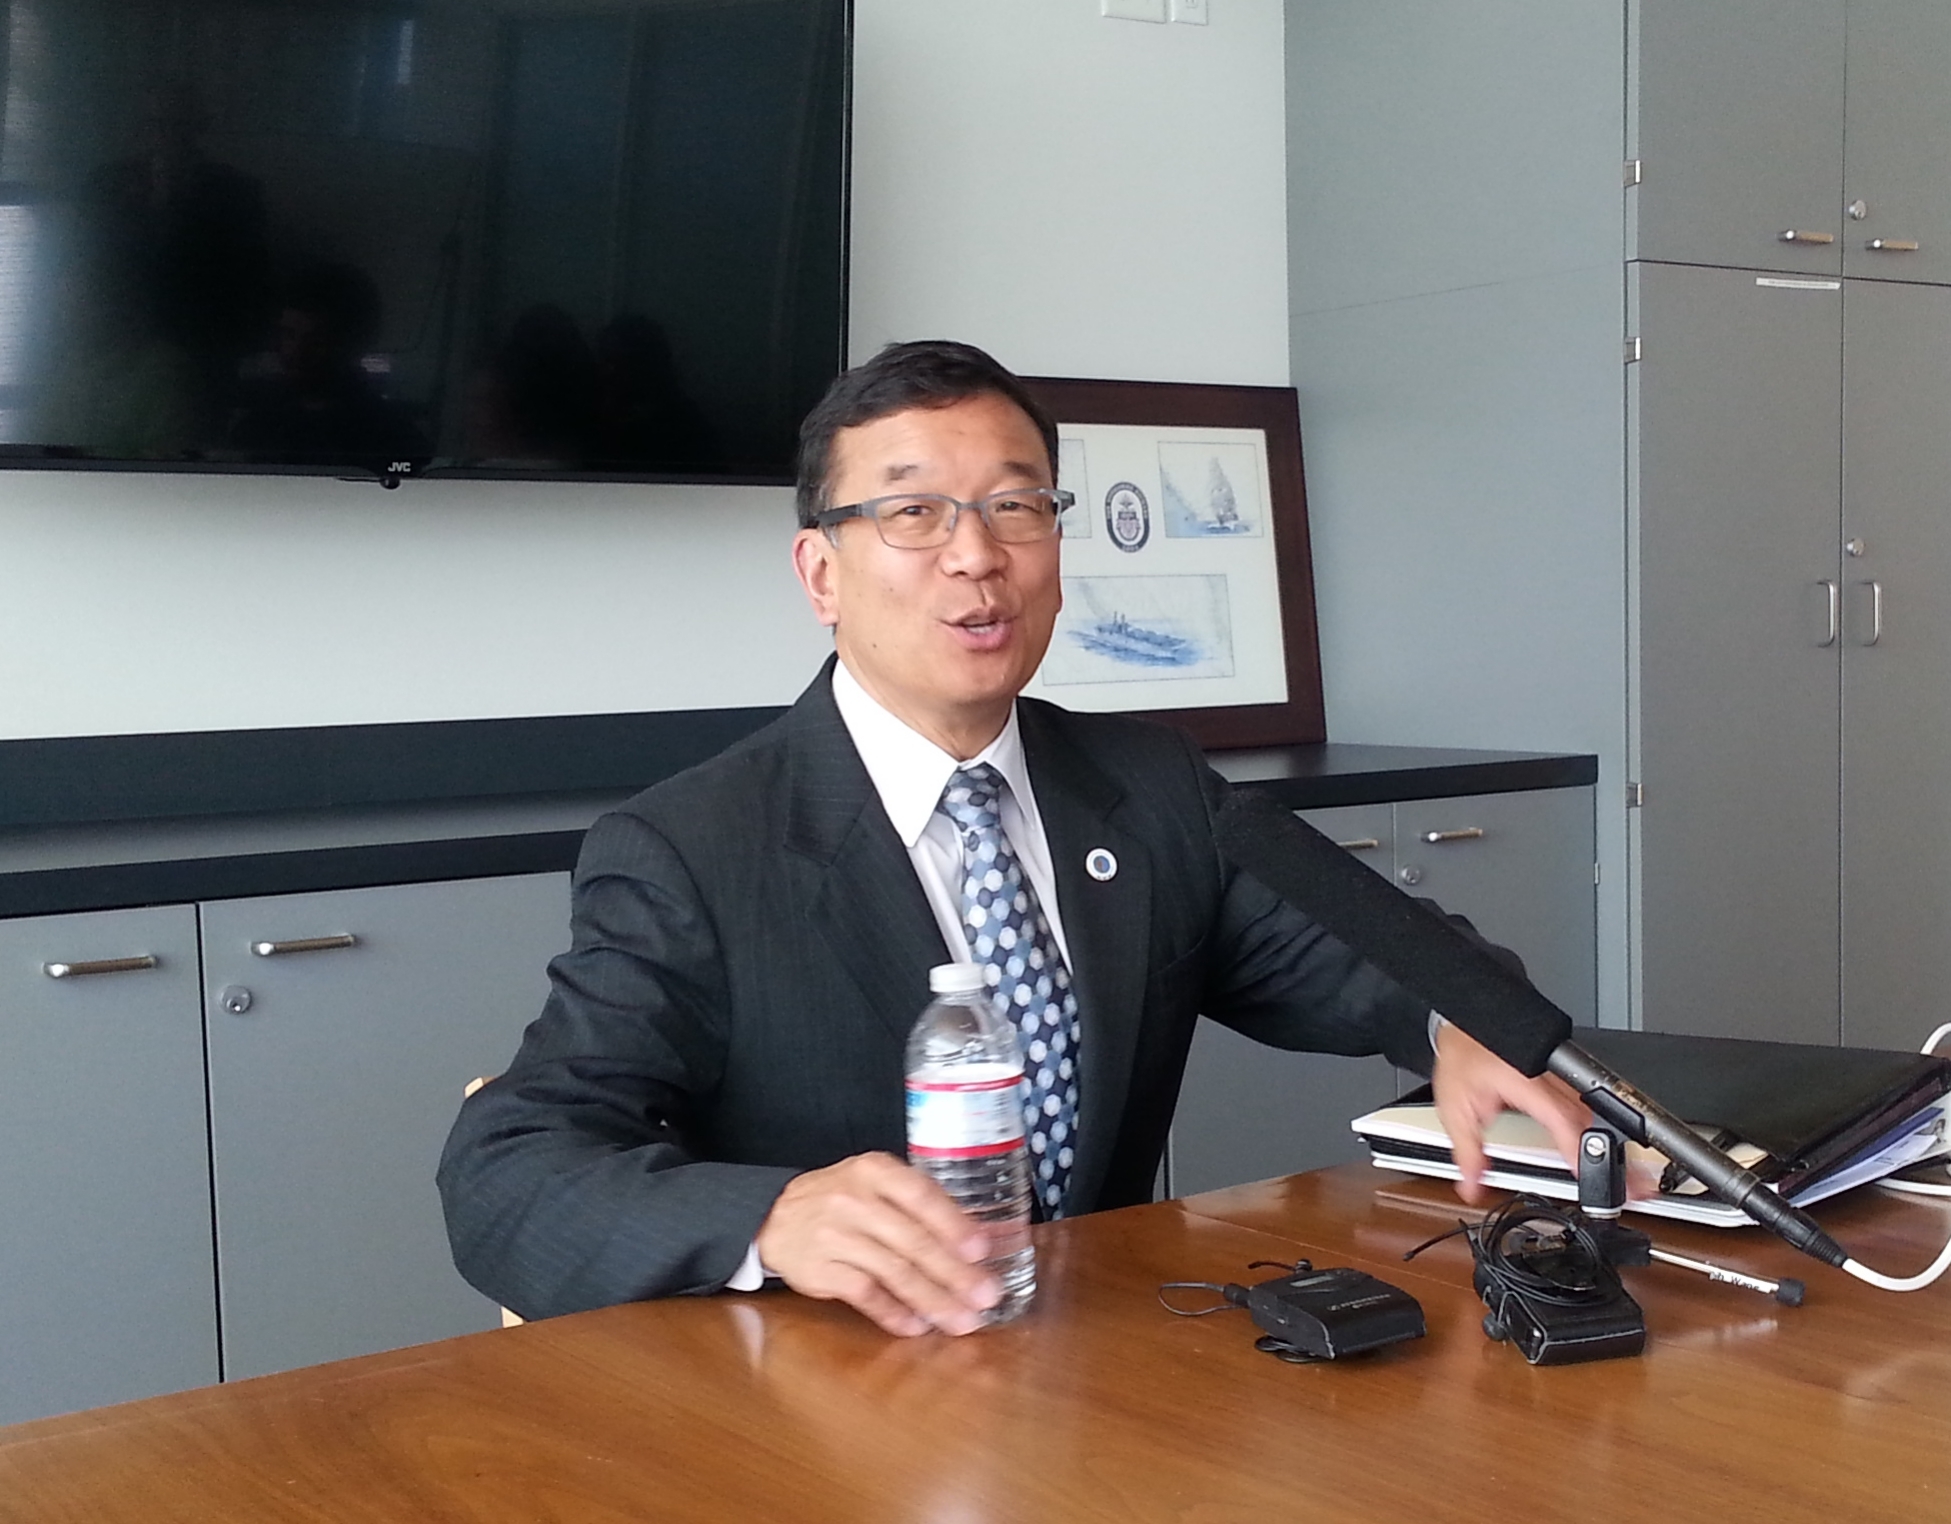 Okamoto fields questions at a press conference following the vote. Photo by Casey Jaywork